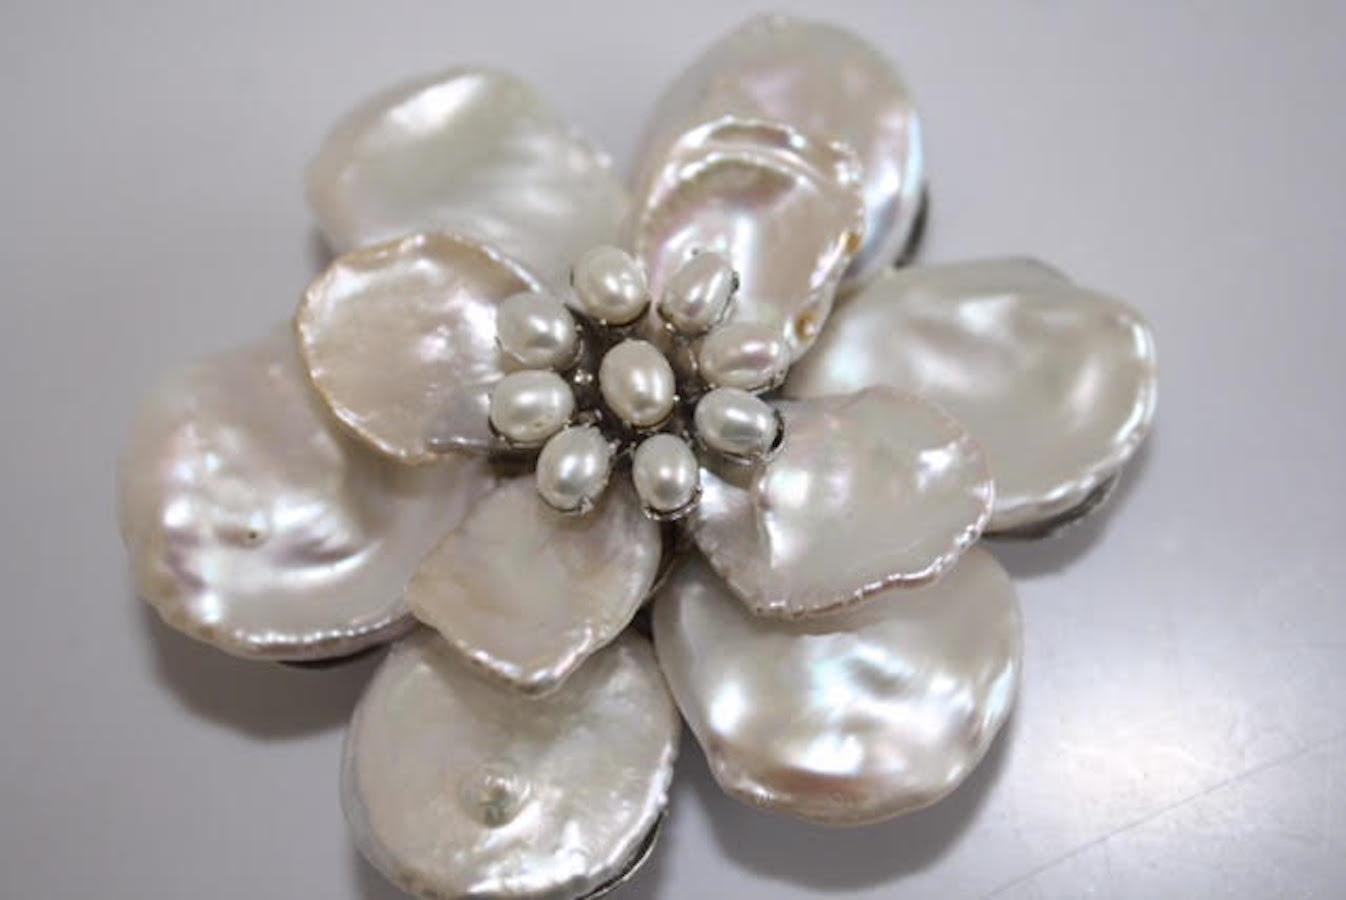 Medium white Keshi pearl flower with pearl center brooch. From Mei's Jewelry, made in NYC. 						